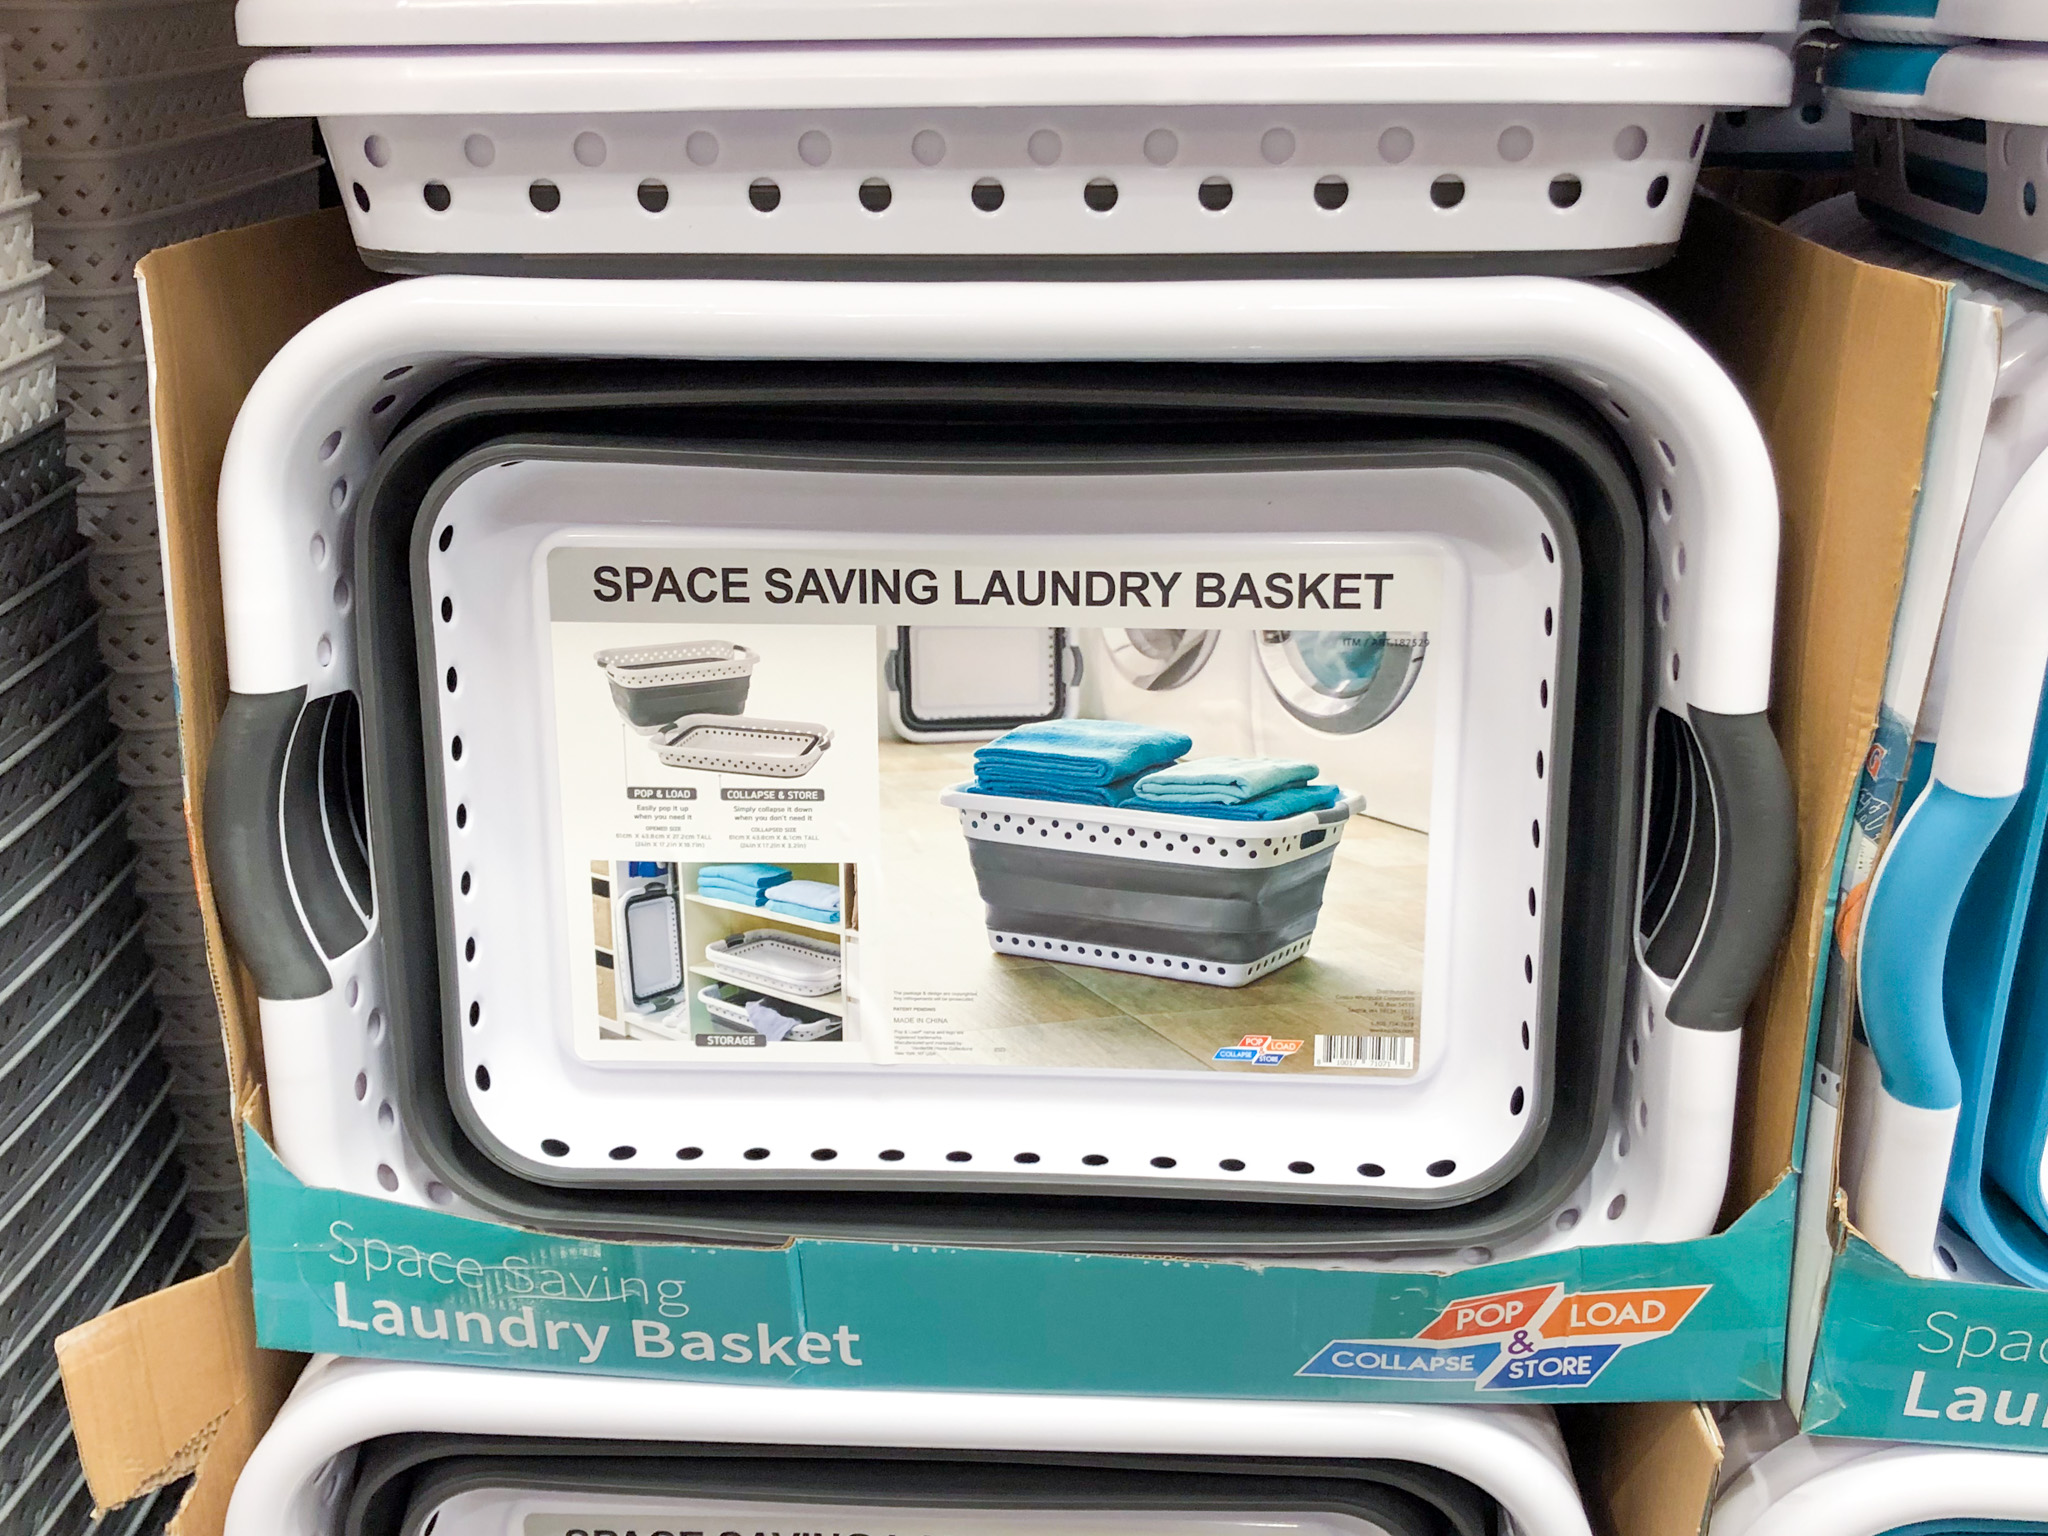 Could you use one of these collapsible laundry baskets from Costco